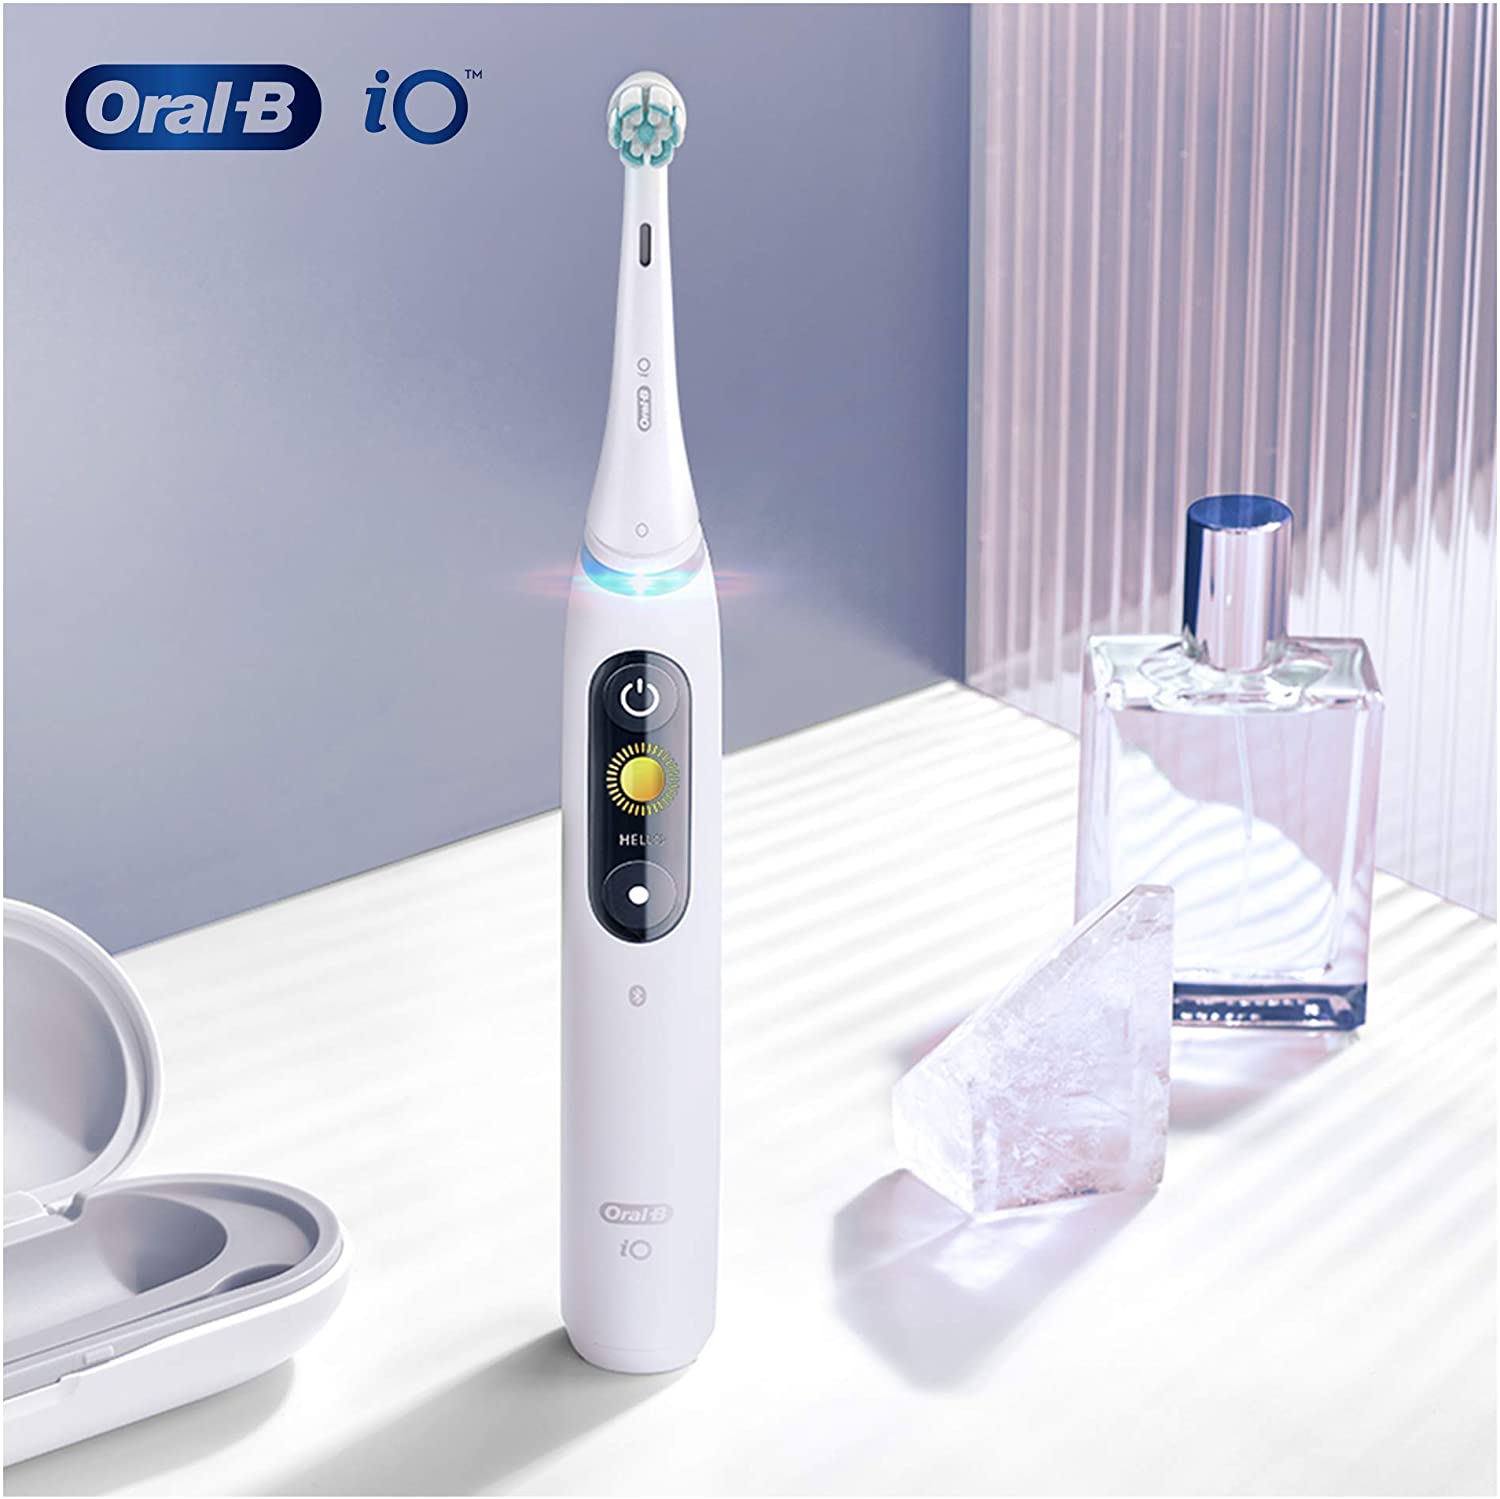 Oral-B iO 4pk Gentle Cleaning Toothbrush Heads for Sensational Mouth Feeling - Healthxpress.ie